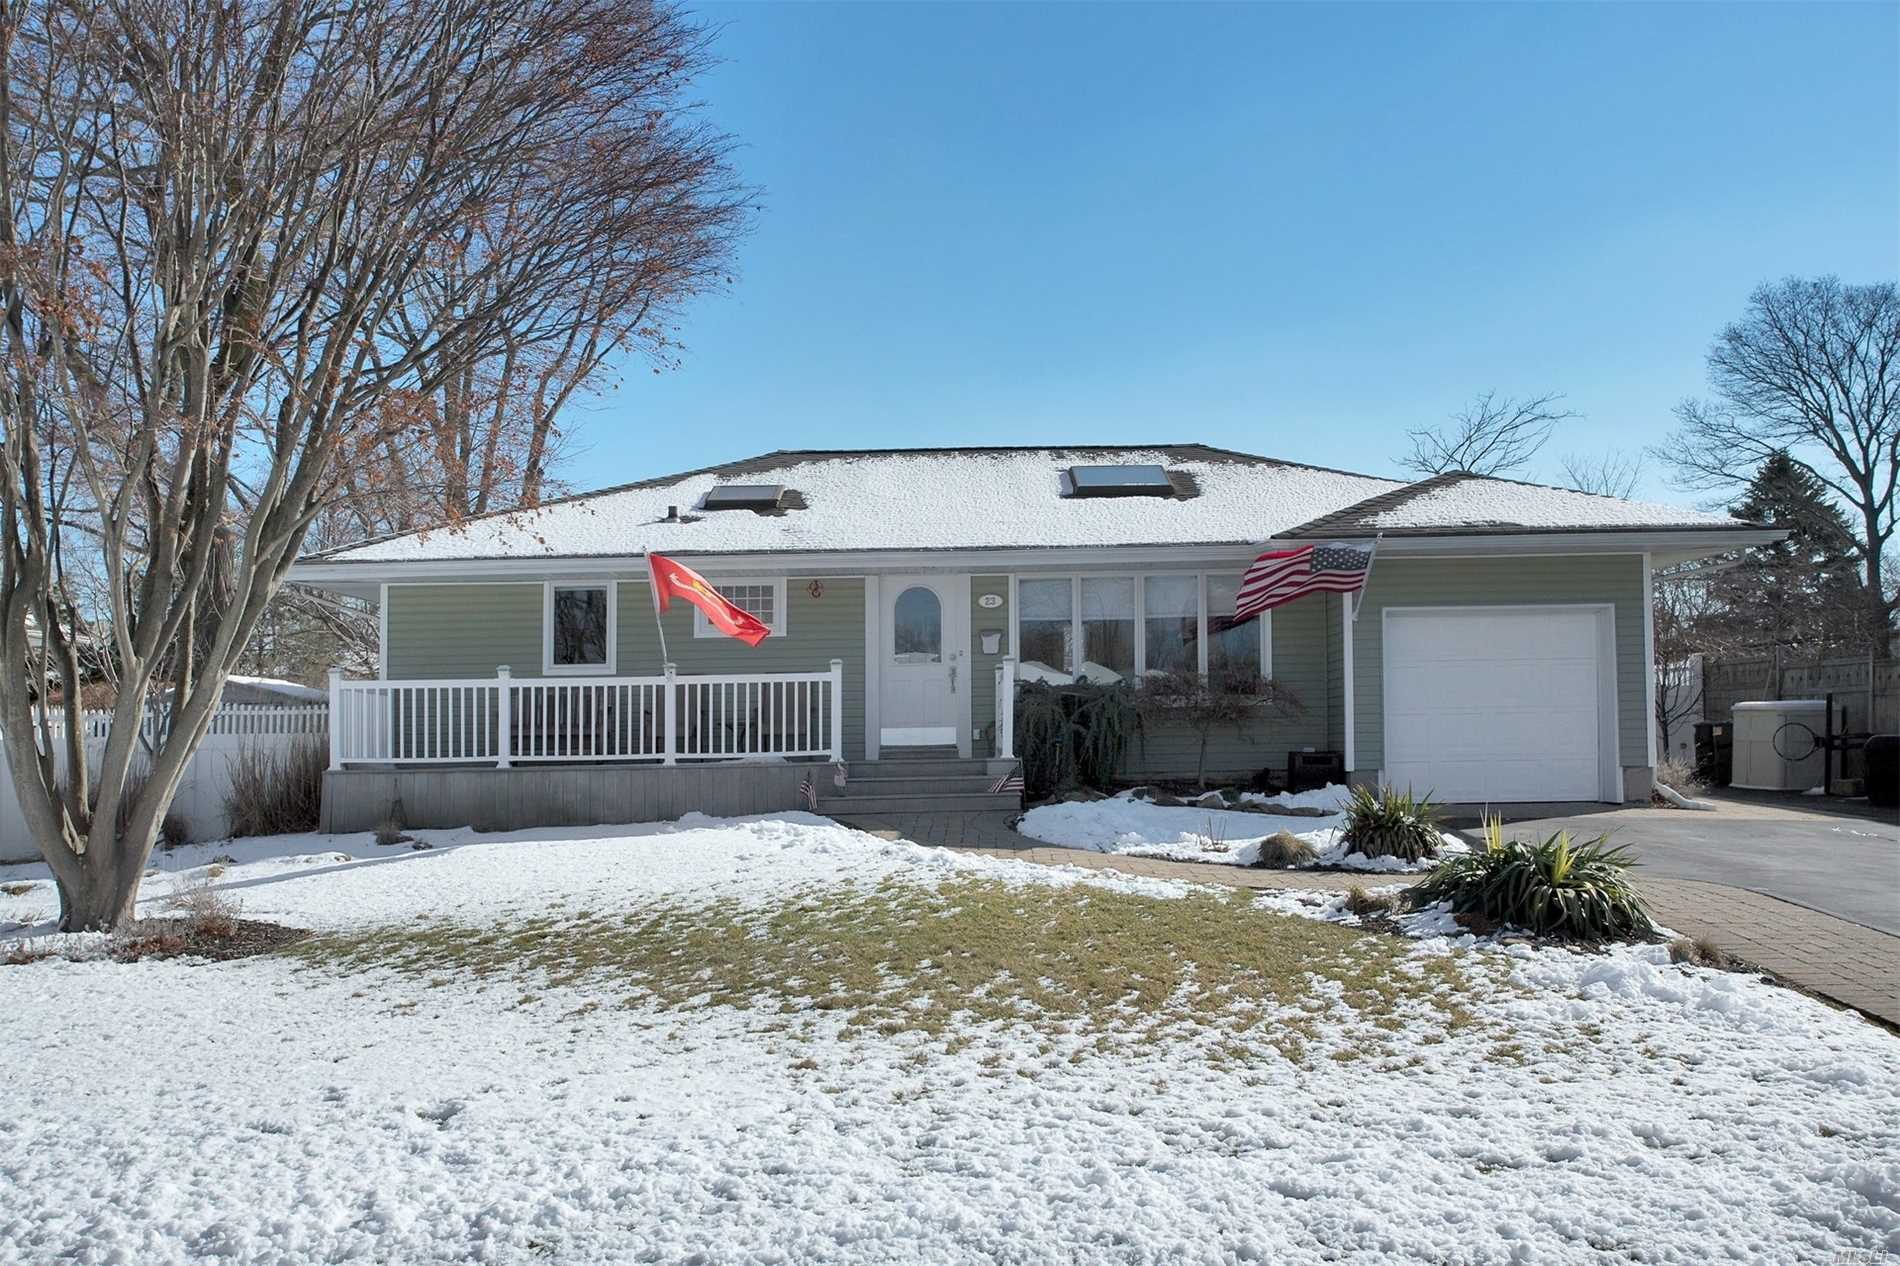 An Entertainers Dream! Open Layout. New Baths. Pool Liner 3 Years Old.  Updated Kitchen. Huge Yard With Large Unground Pool. Great Curb Appeal And Highly Desirable Neighborhood Of Country Village South Of Montauk! Excellent Schools! Star Rebate Is $1, 225.00